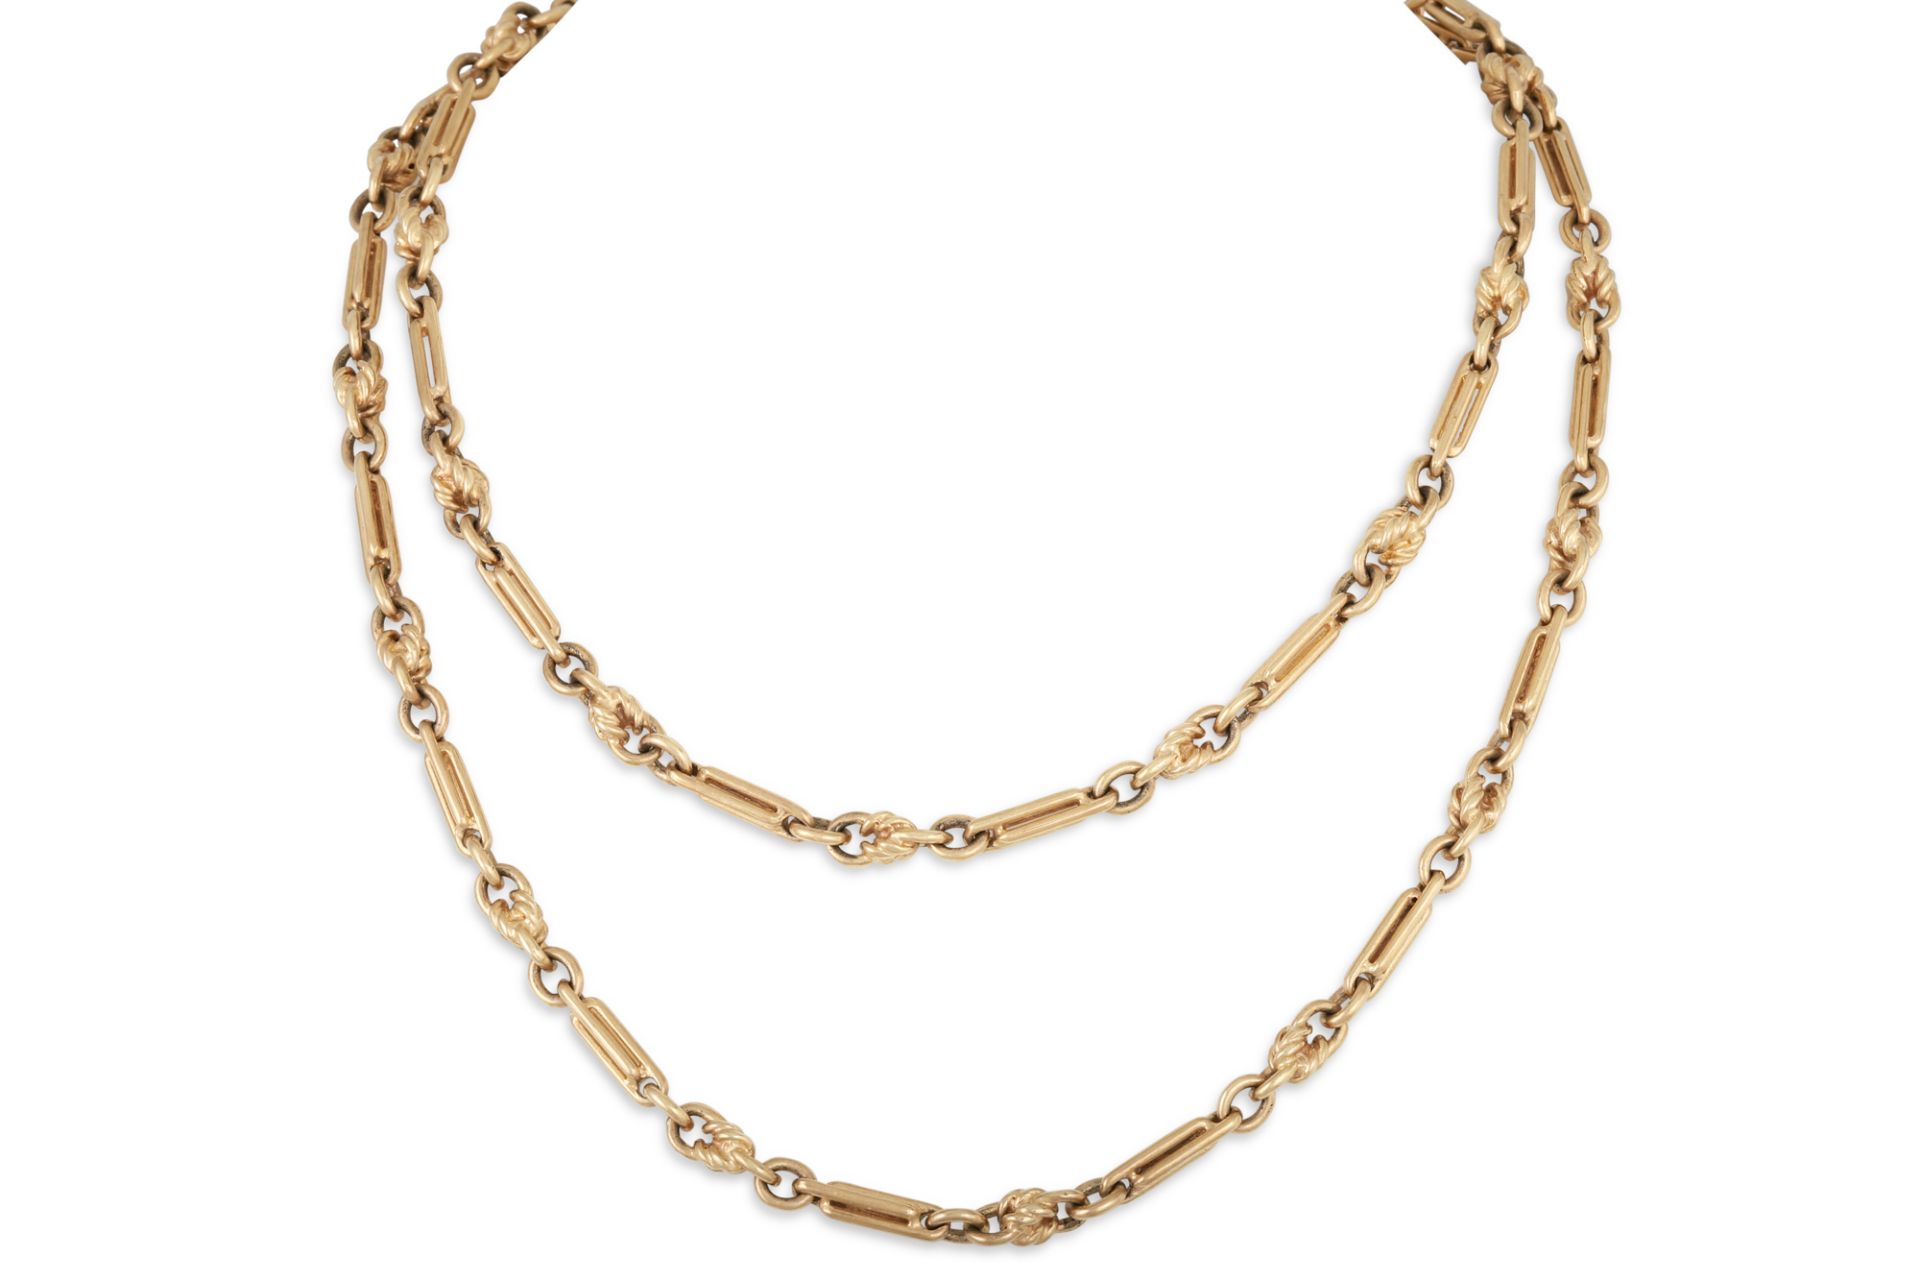 A 9CT YELLOW GOLD SOLID TROMBONE LINK NECK CHAIN, ca 29" long, 47.7 g.